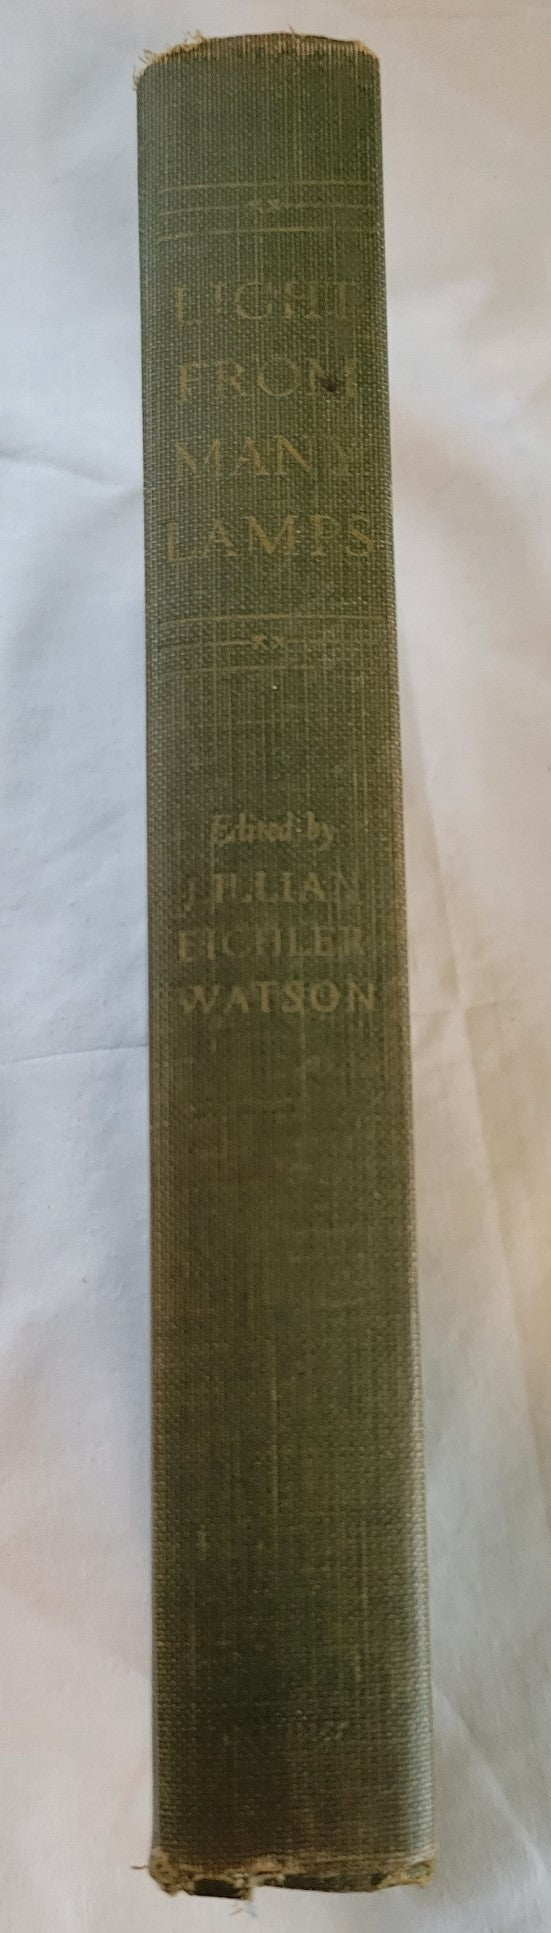 Vintage book for sale, “Light from Many Lamps” edited by Lillian Eichler Watson, 1951, a storehouse of inspired and inspiring reading, it is a collection of brief, stimulating biographies as well.  View of spine.